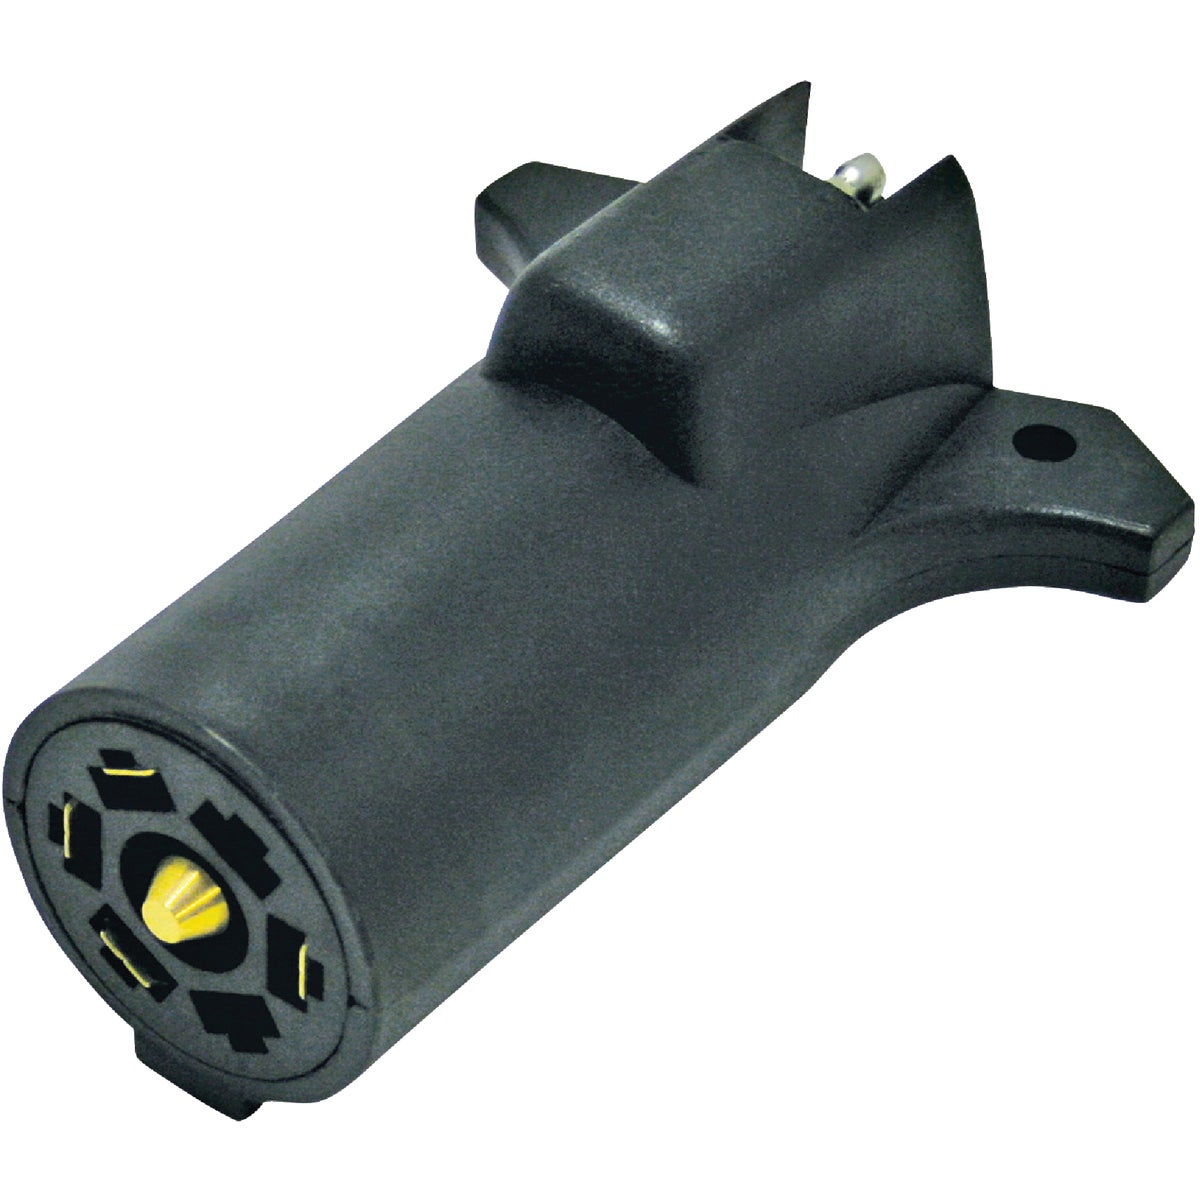 Item 580325, This adapter allows connection of either 4 or 5-way flat trailer plug to 